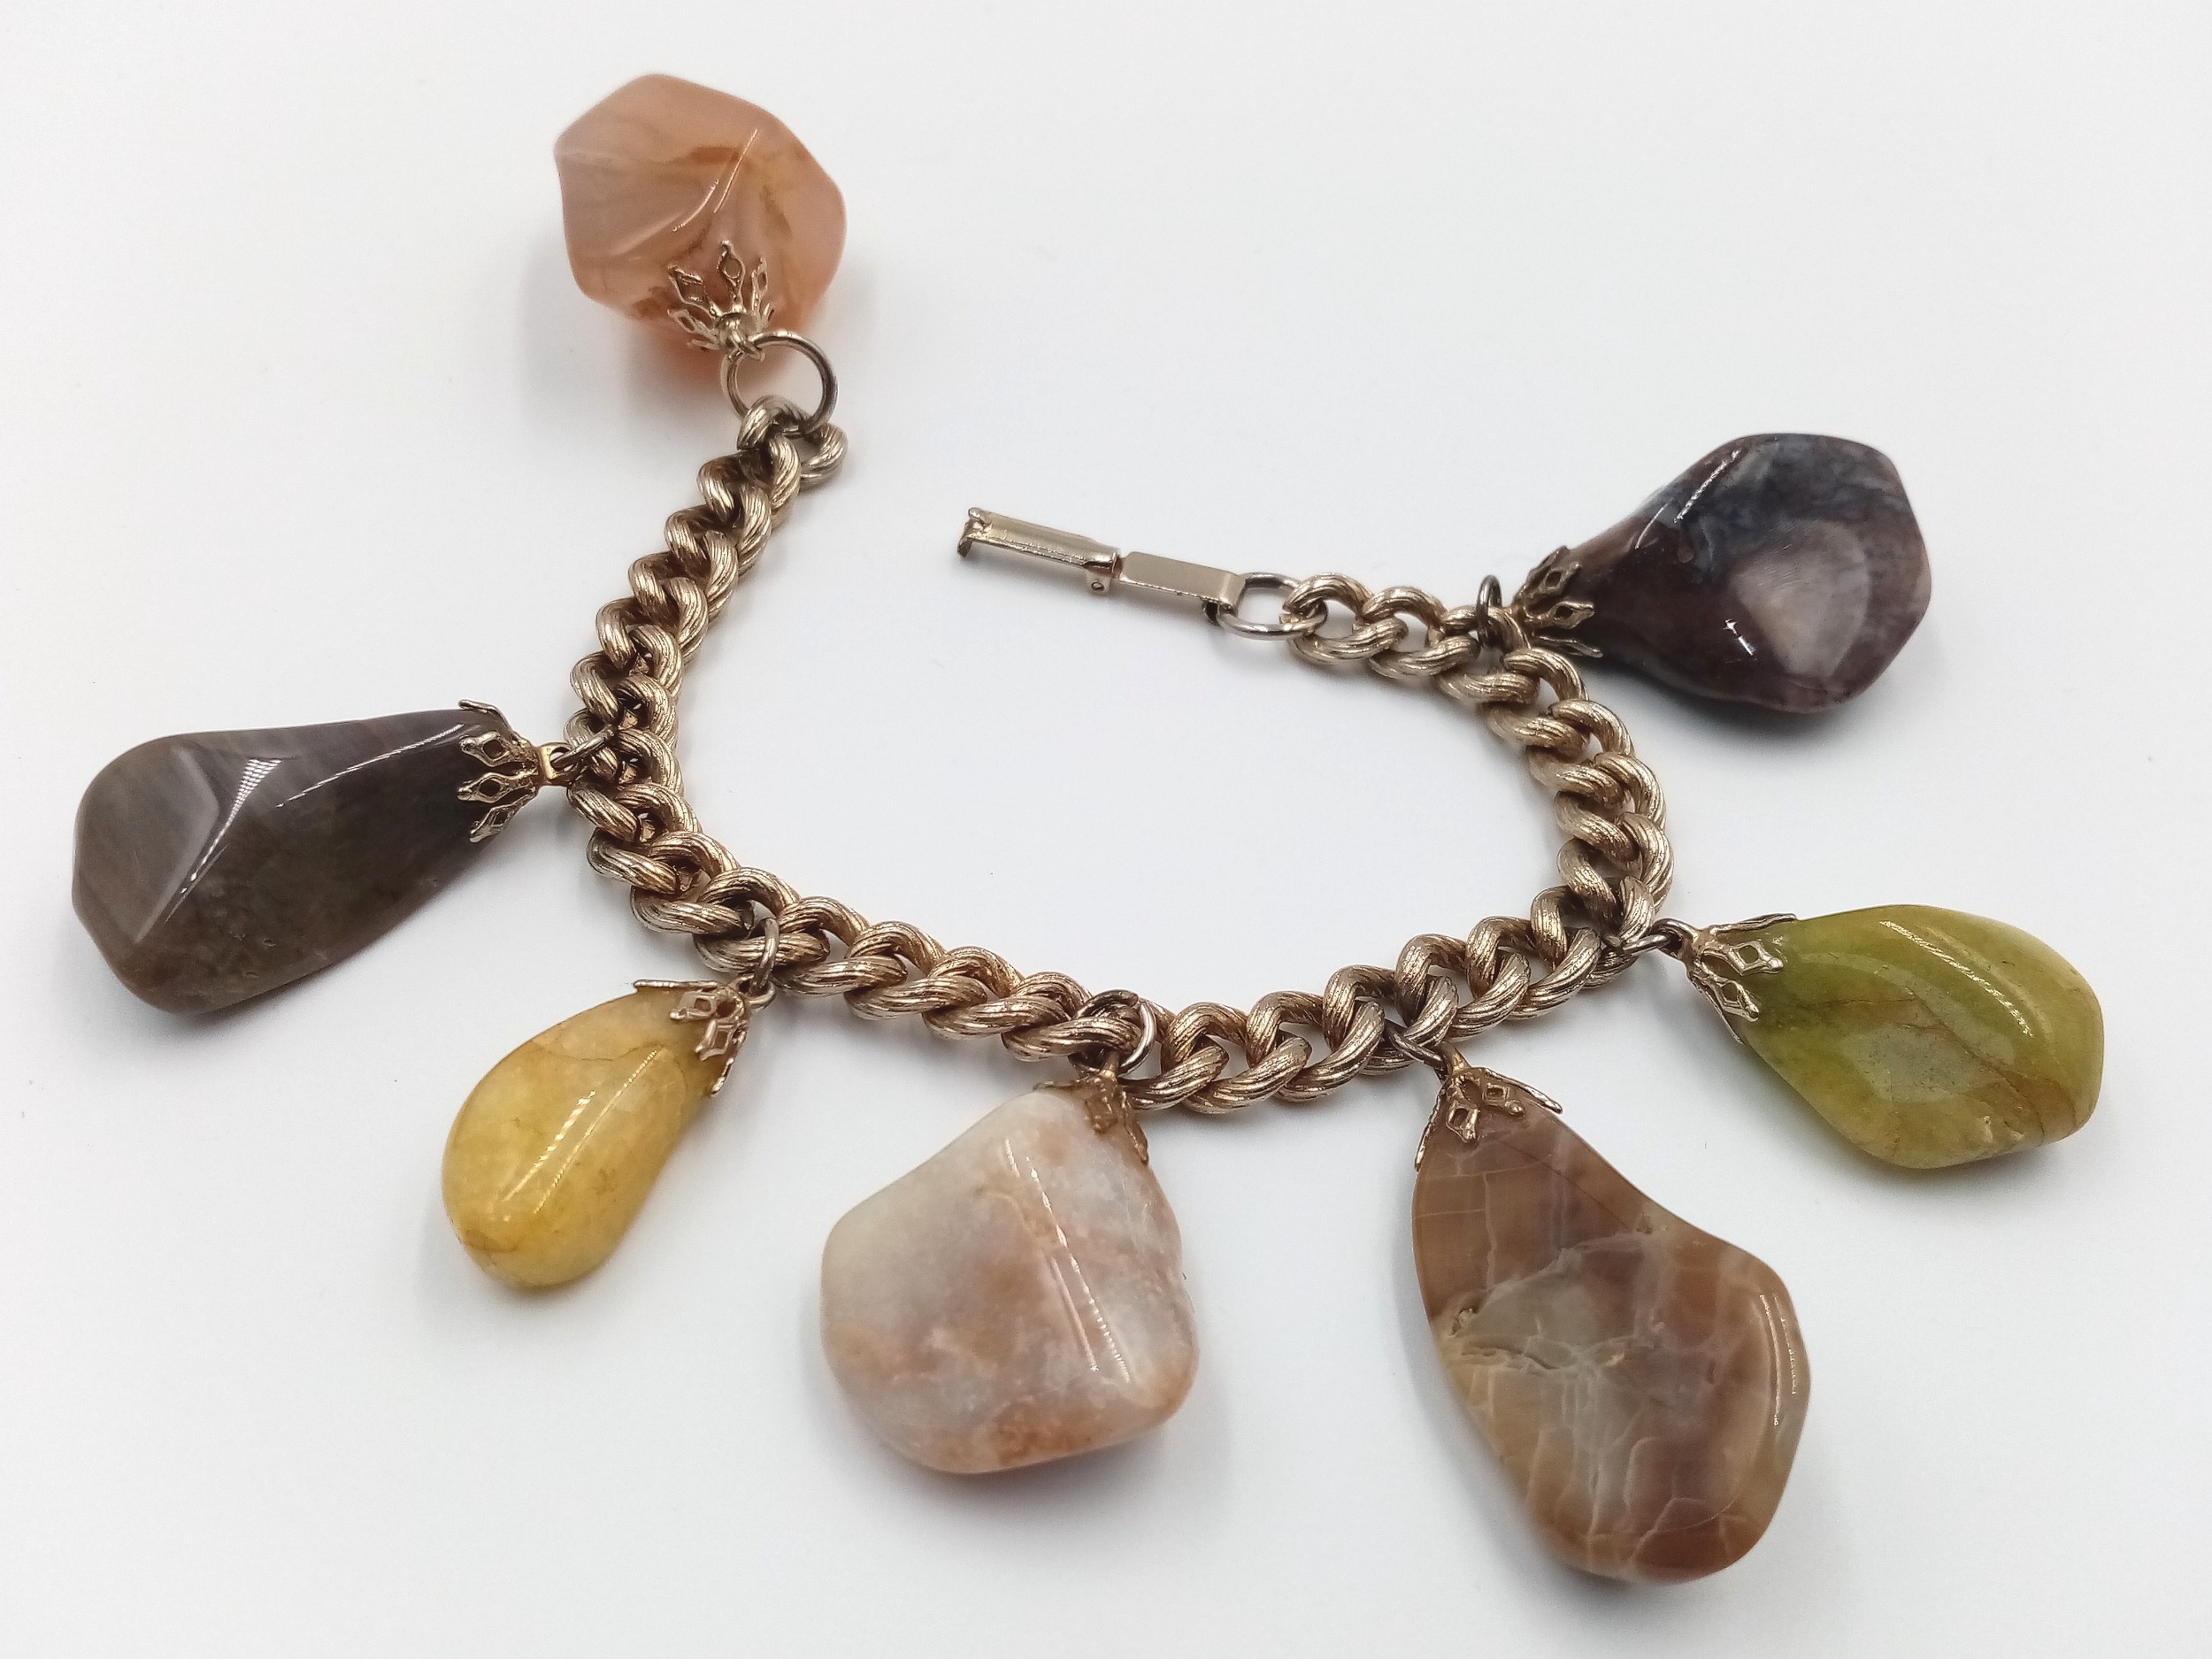 A Mixed Natural Gemstone Bracelet. Smoothed labradorite, agate and quartz. 18cm - Image 2 of 3